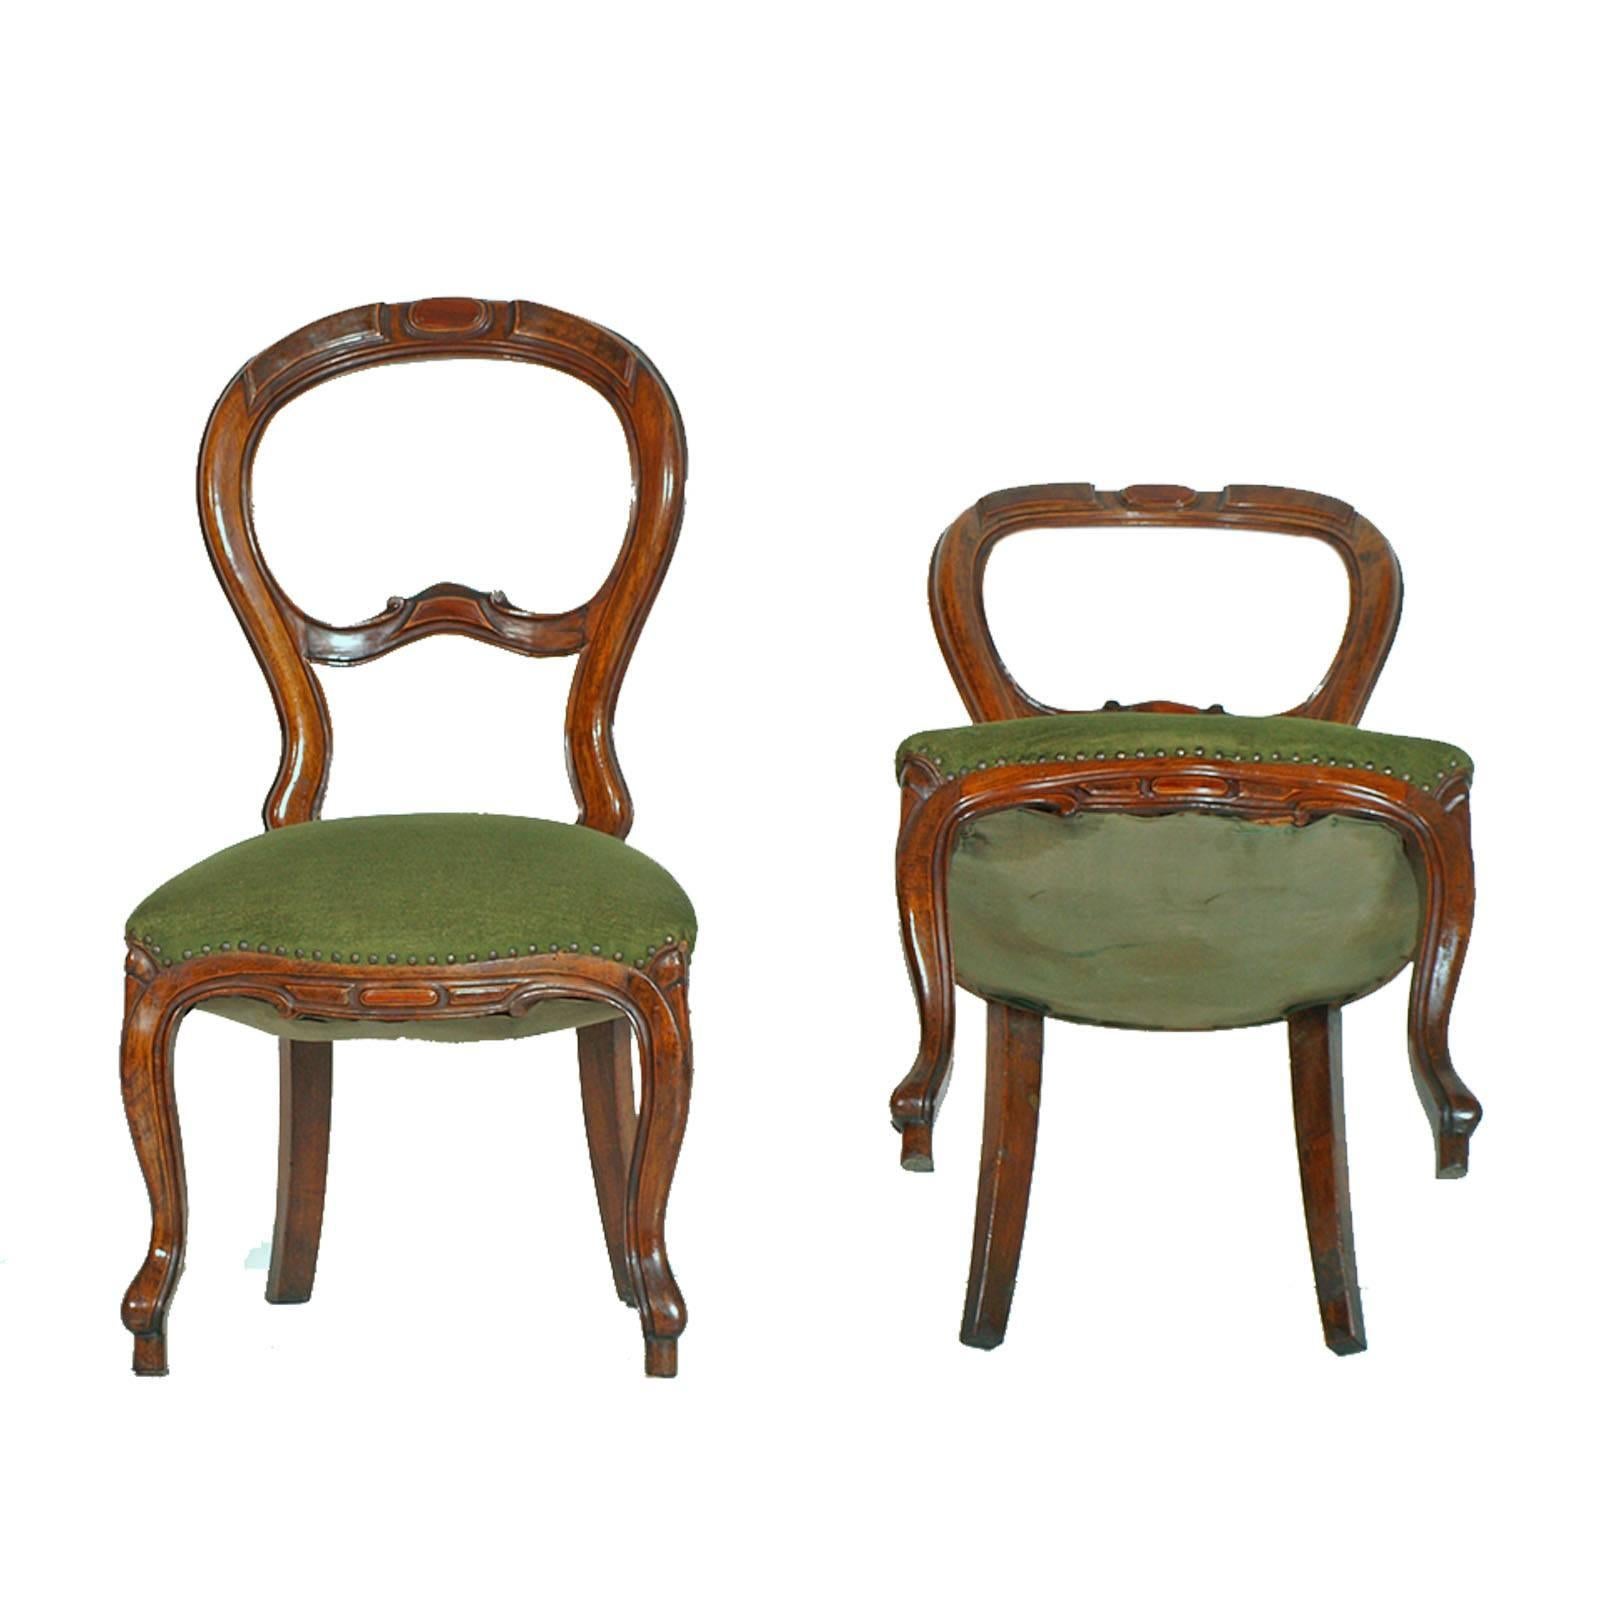 Italy, pair of 19th century baroque side chairs, in hand carved walnut, velvet upholstery in good condition. Restored, polished to wax.

Measure cm: H 90\43, W 50, D 48.